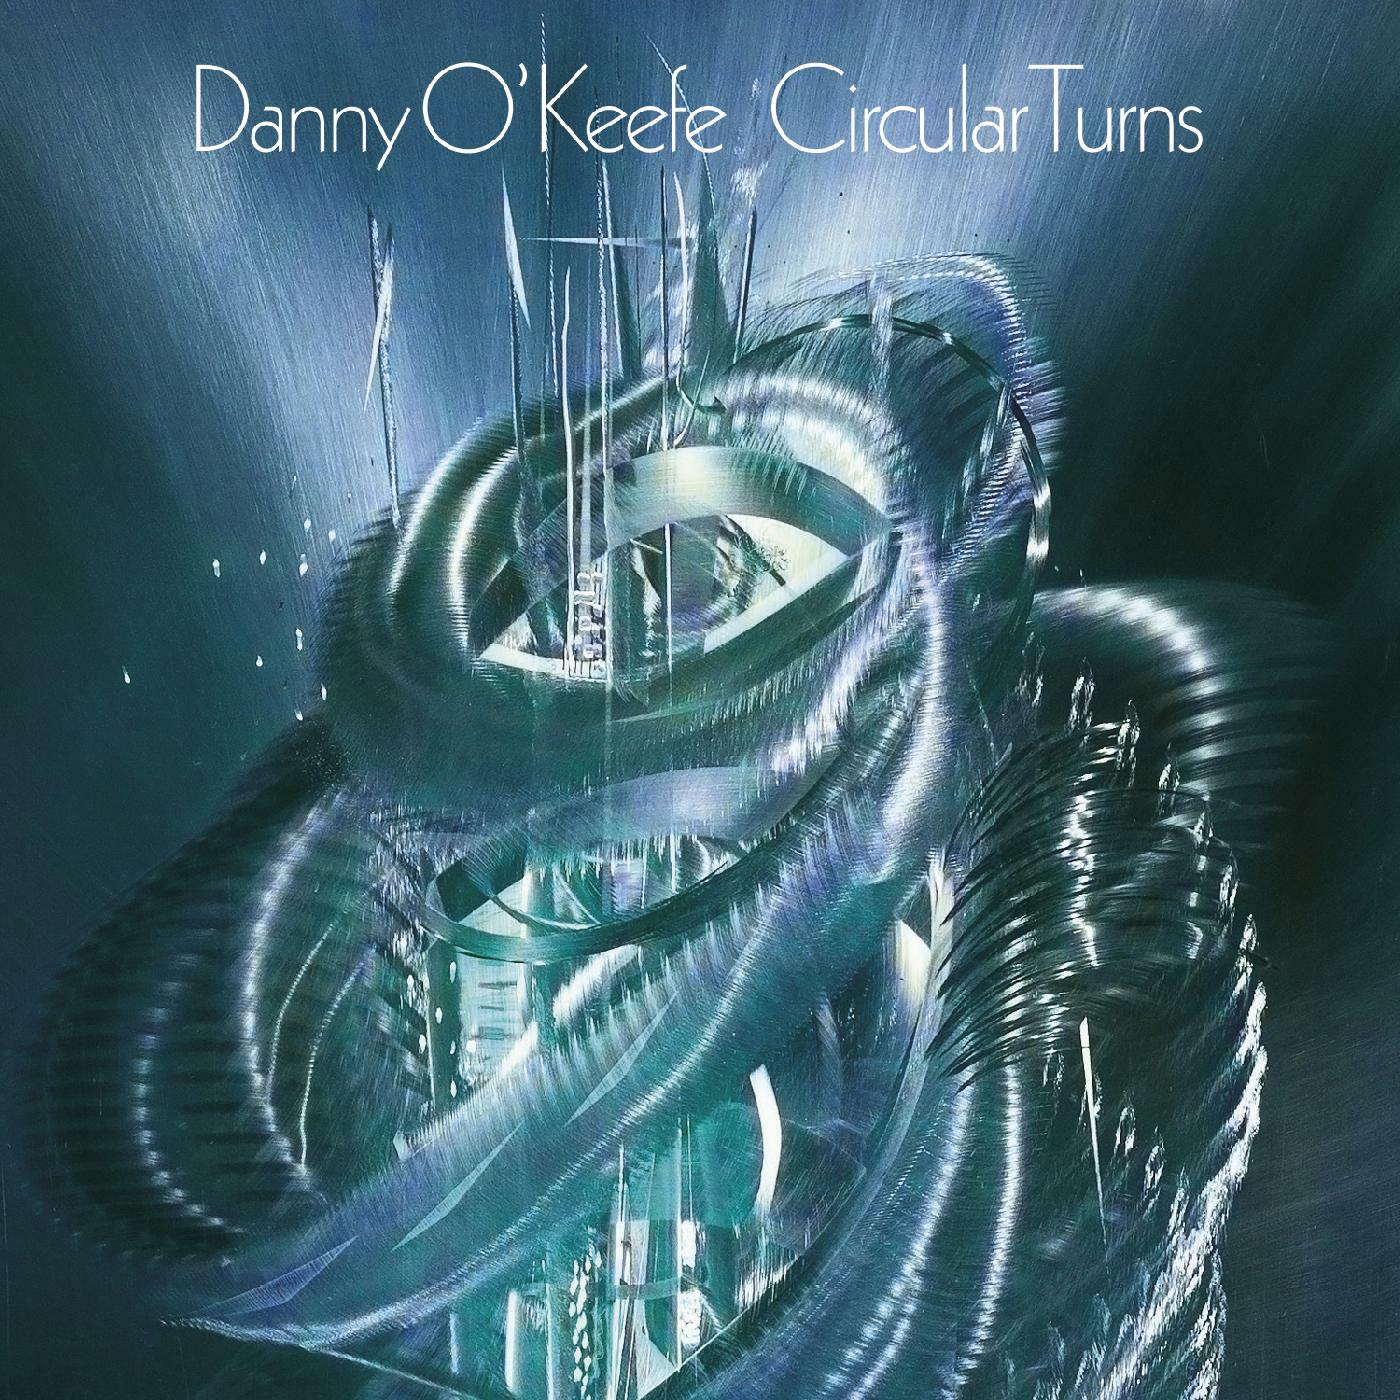 Danny O'Keefe - When You Come Back Down